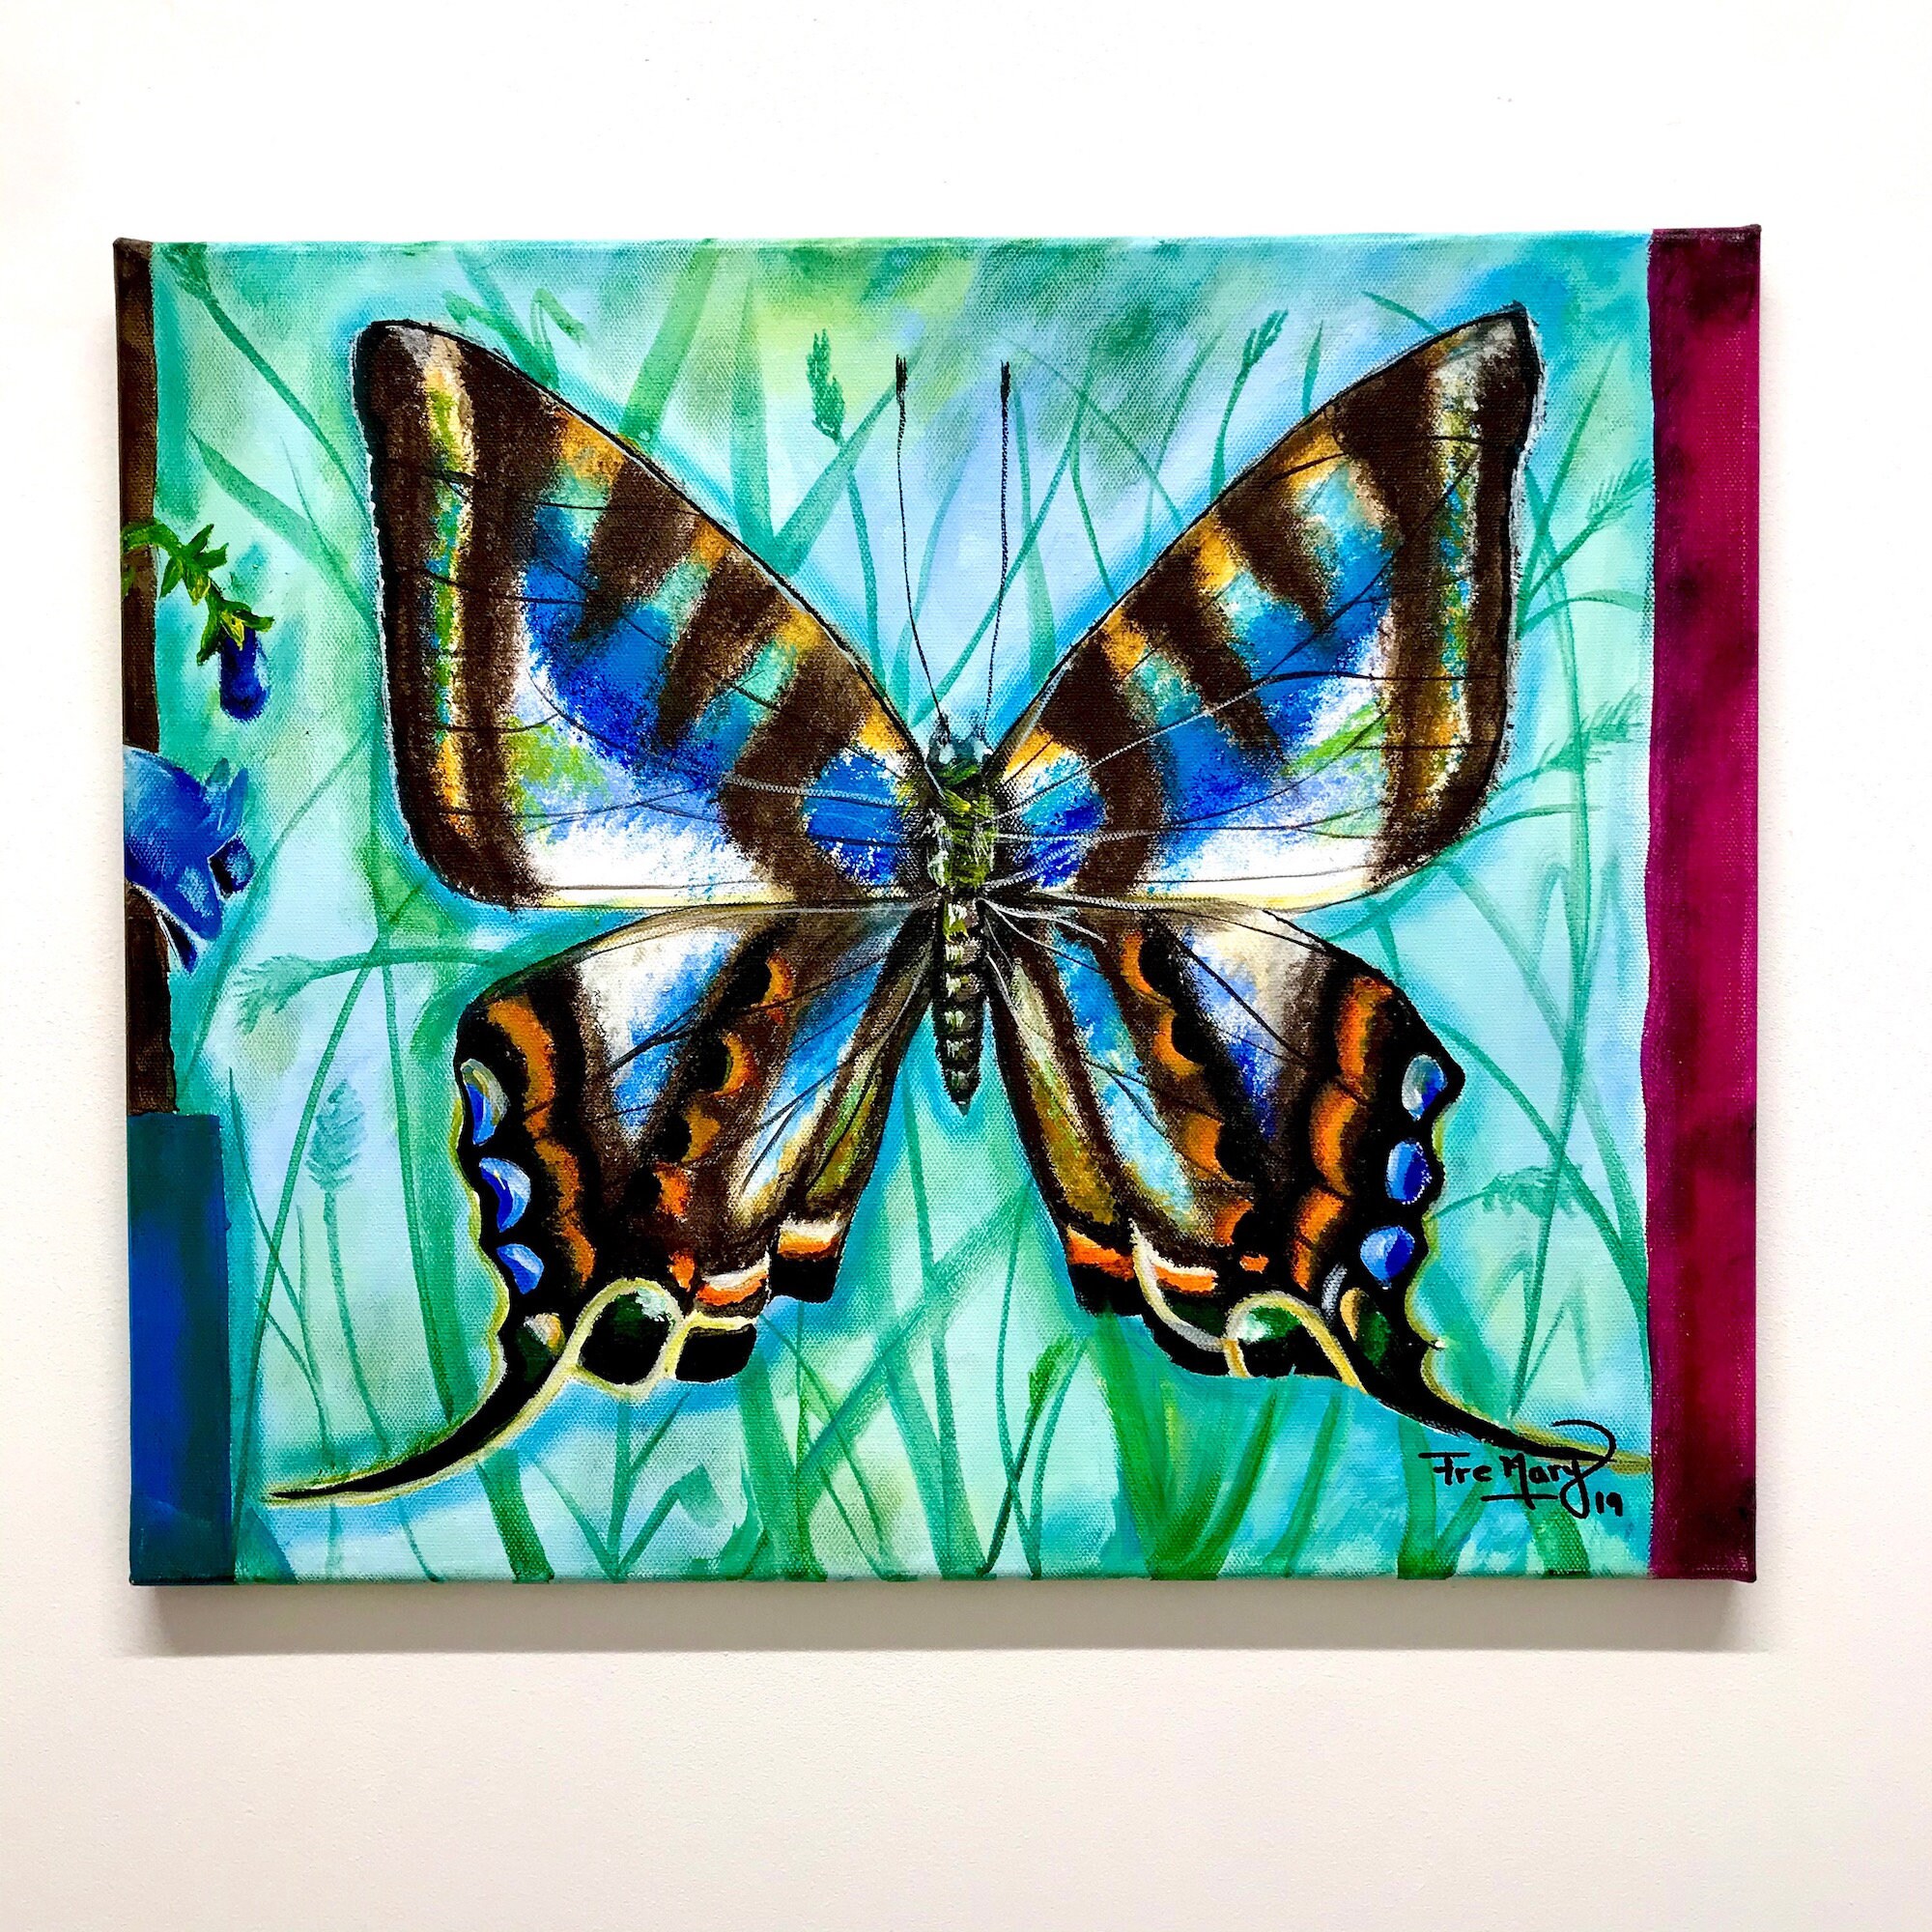 Butterfly Acrylic Painting On Canvas 46x38cm Size/Nature Lover Art Wall/Unique As Picture/Wildlife P